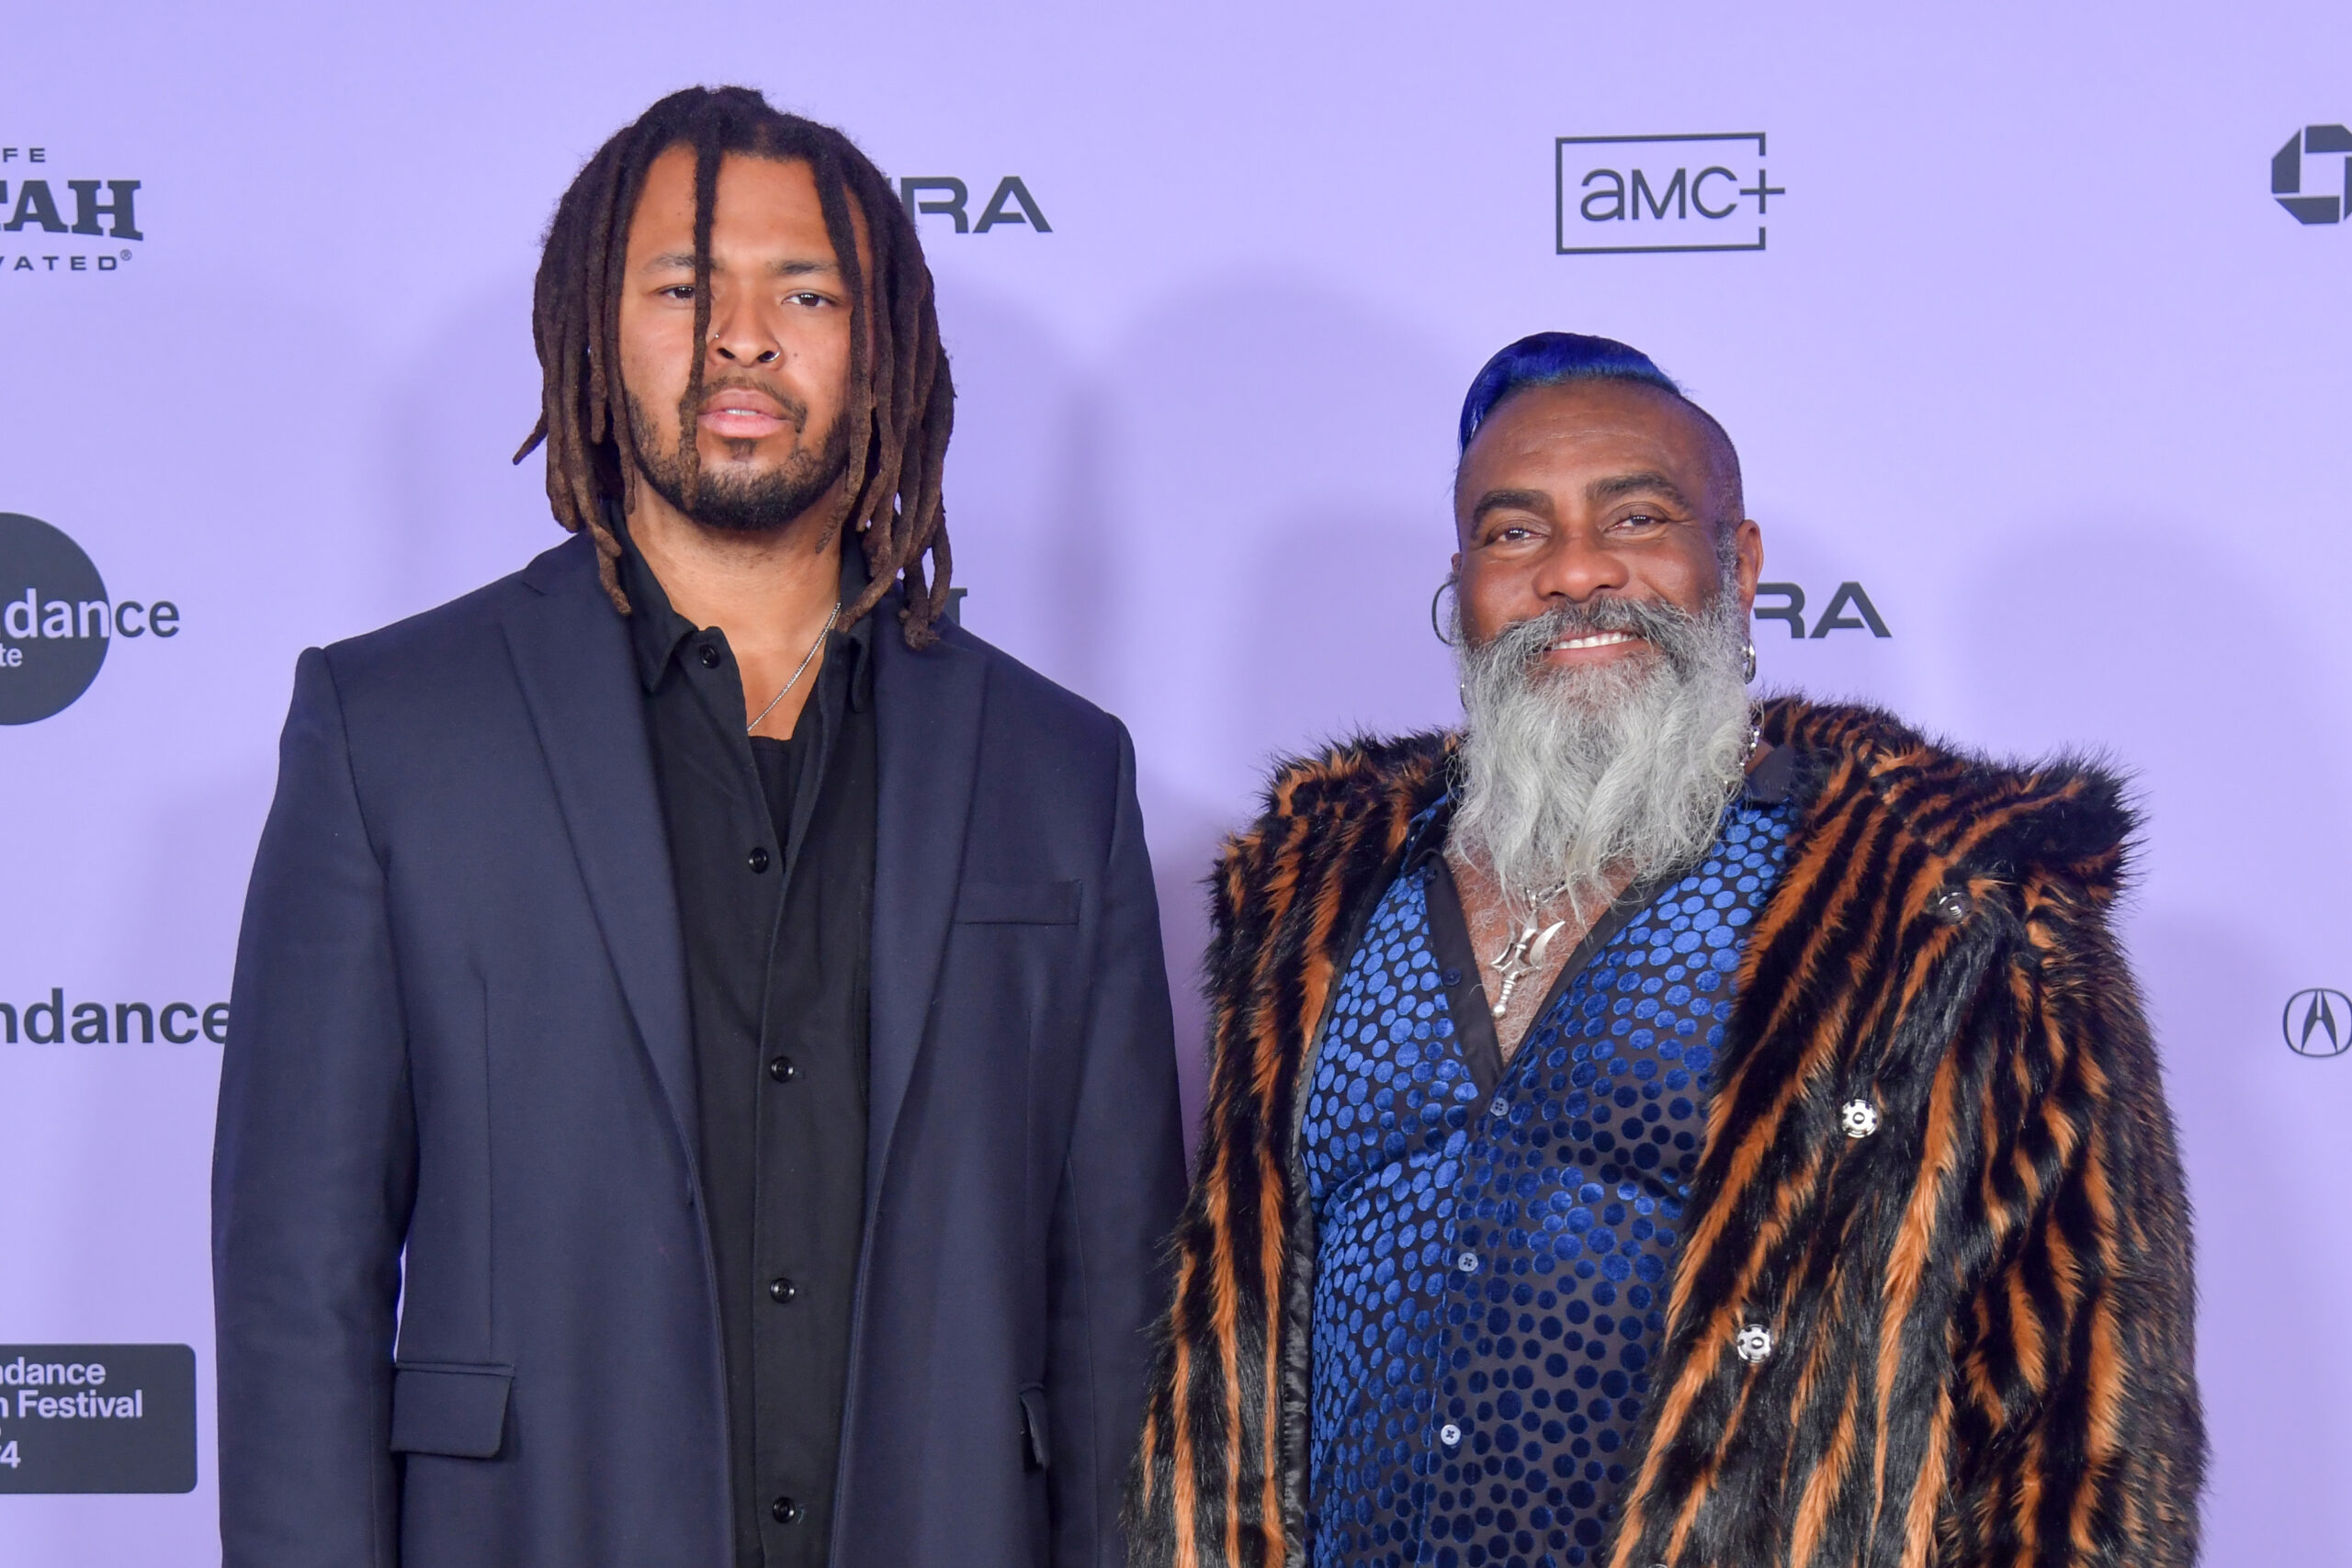 Two Black men, one with a beard and dreadlocks, the other with a long gray beard and wearing an orange-and-black-striped coat, stand in front of a Sundance Film Festival backdrop.